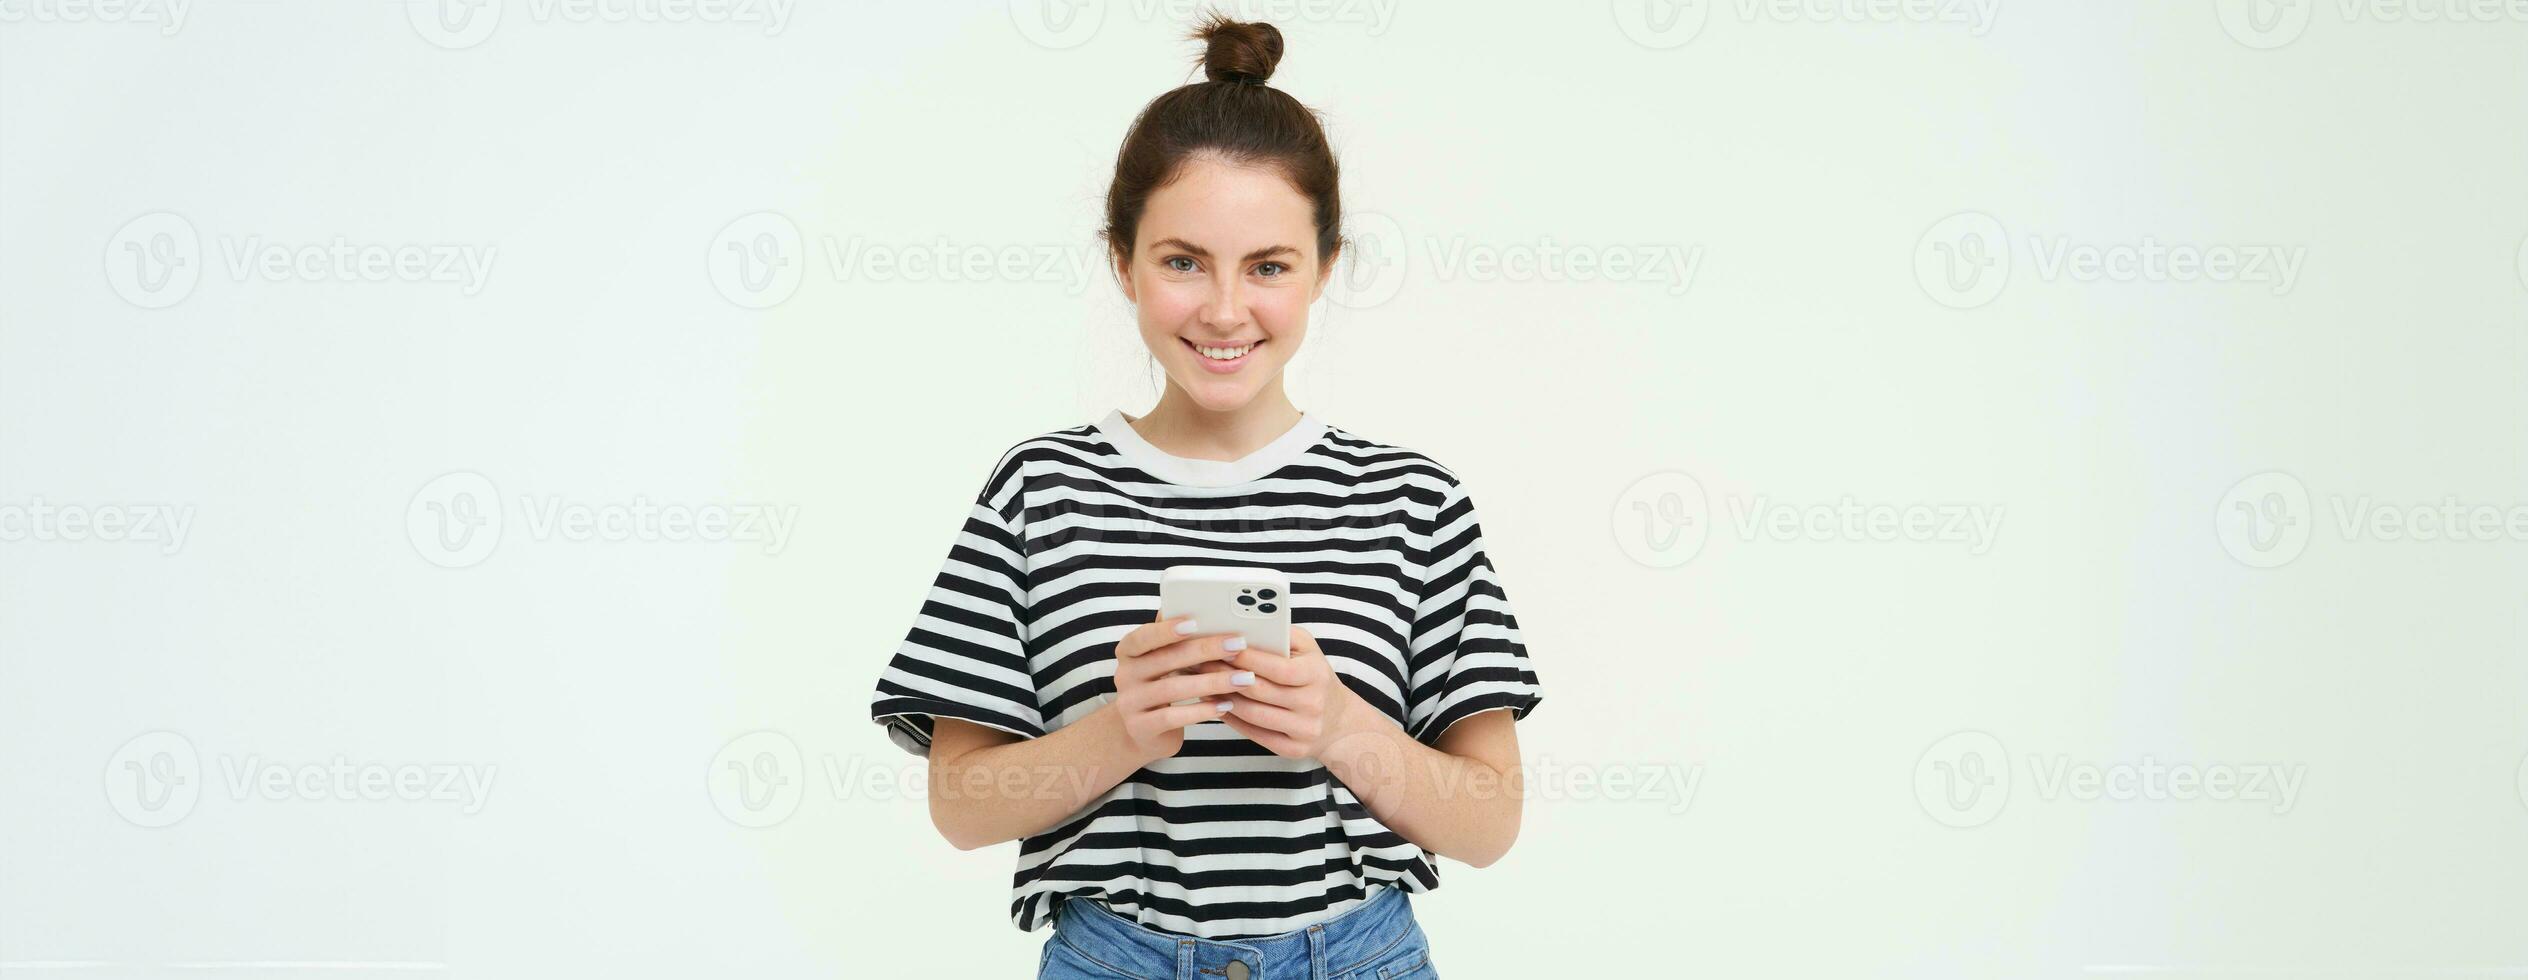 Technology and people concept. Young woman with mobile phone, smiling, using smartphone app, social media application, isolated over white background photo